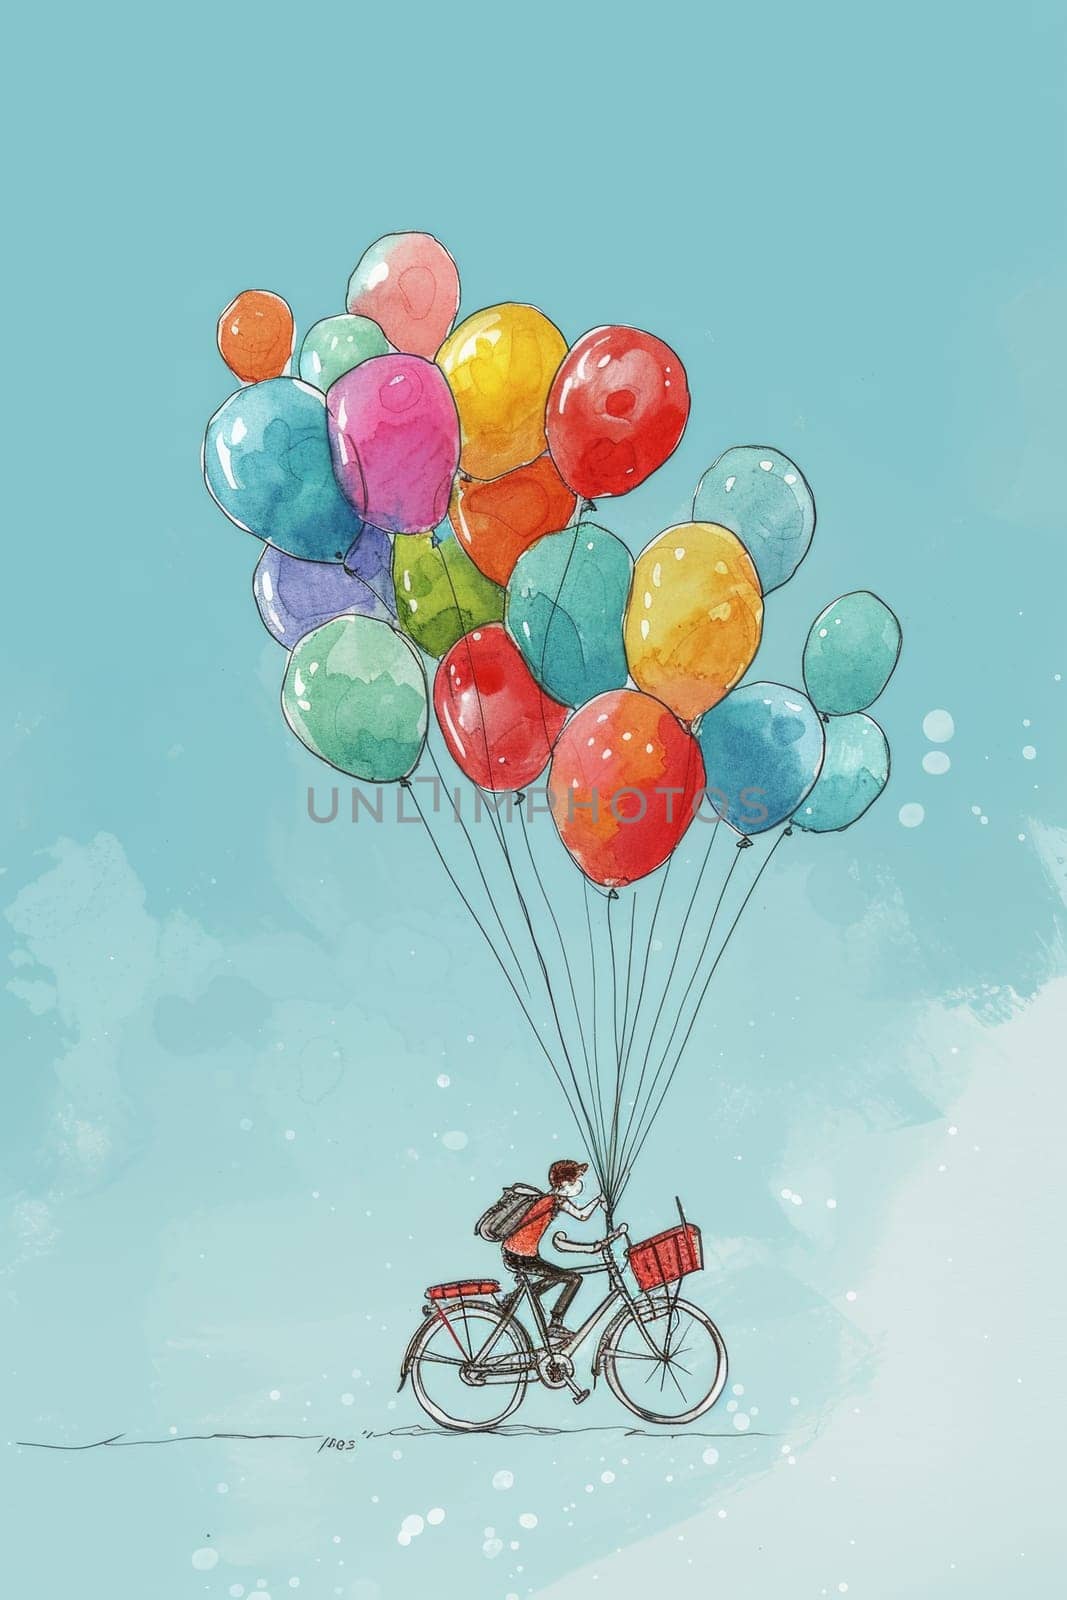 Illustration of a man on a bicycle with a basket, lifted by a bouquet of vibrant balloons against a blue sky